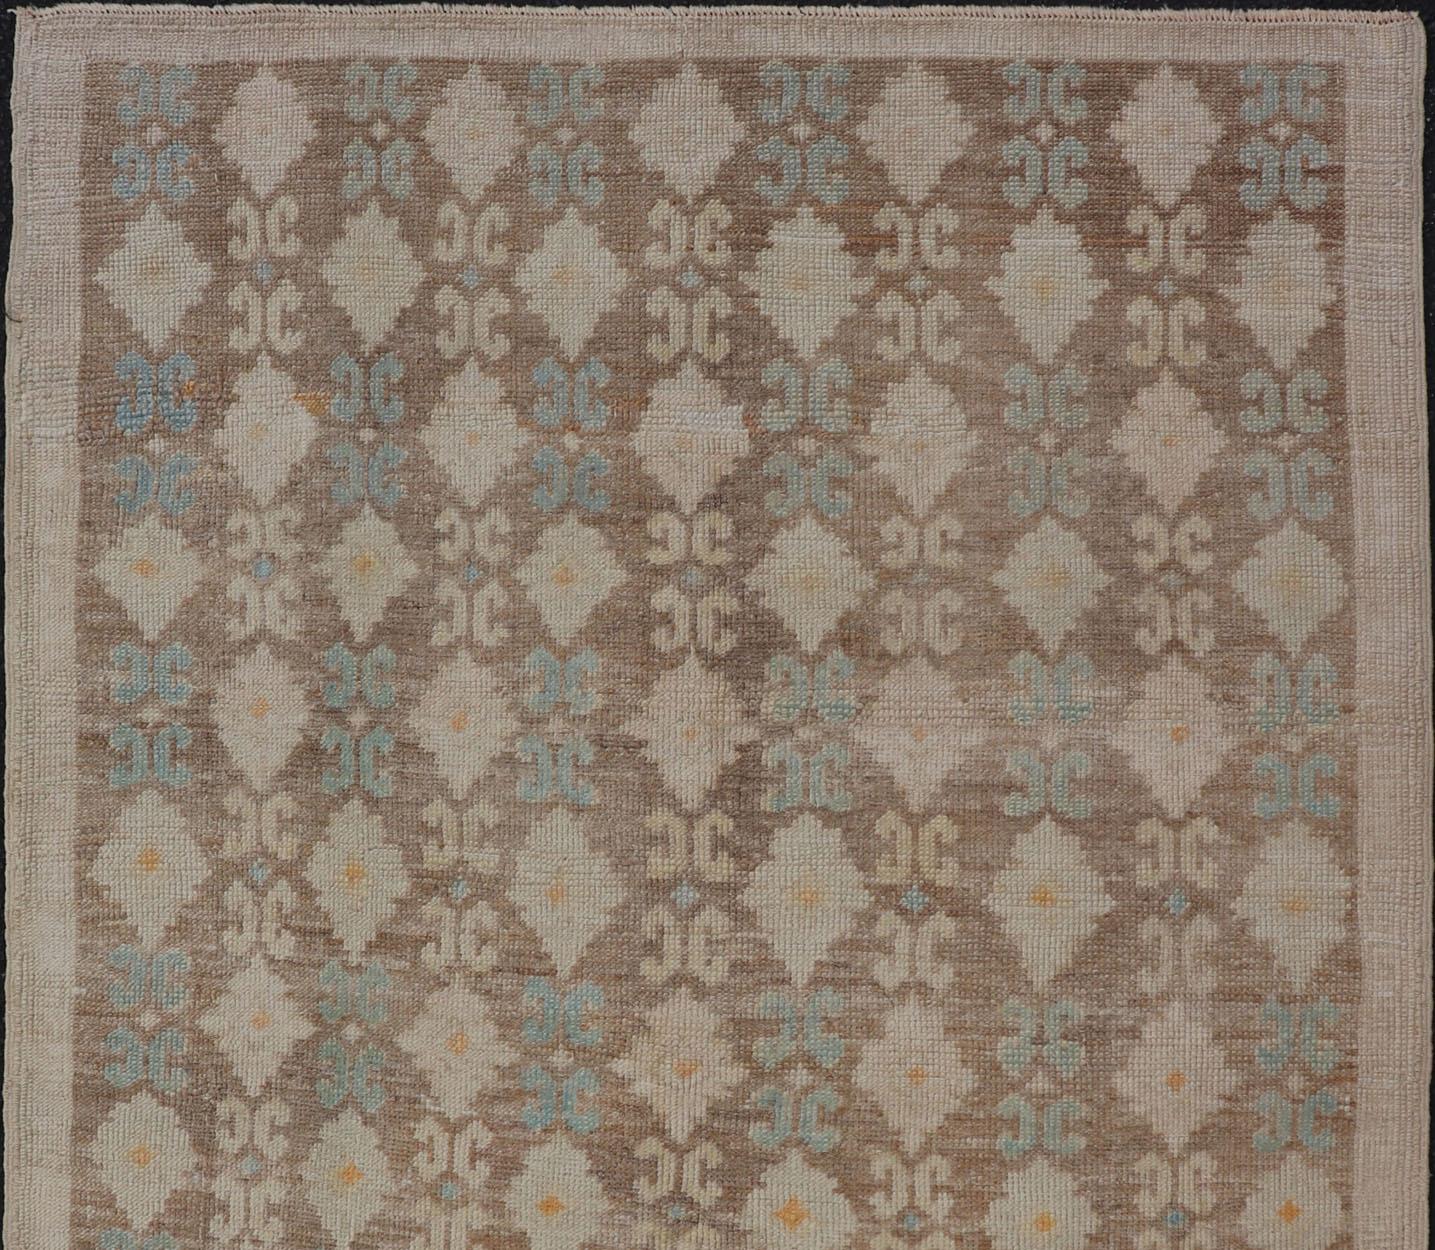 This modern-design vintage Turkish Tulu rug features an all-over Design with a black zig zag line connecting the flowers. Set on light brown background, the flower colors include soft gold, and light blue. 

Measures: 4'2 x 6'9 

All-Over Floral